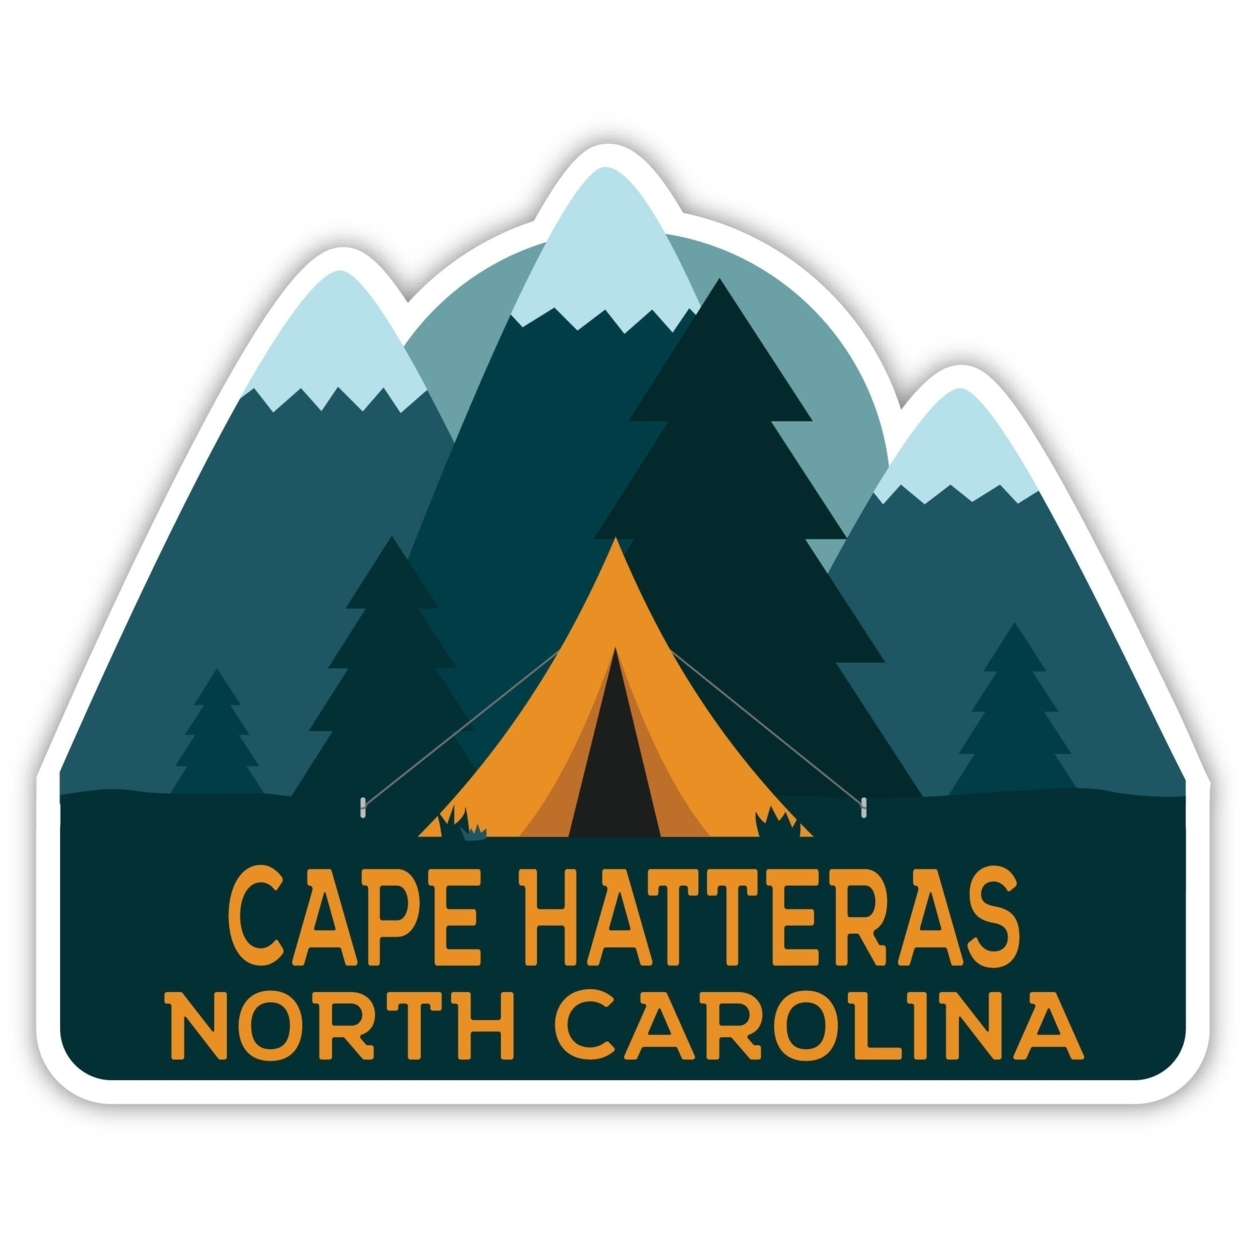 Cape Hatteras North Carolina Souvenir Decorative Stickers (Choose Theme And Size) - 4-Pack, 10-Inch, Tent